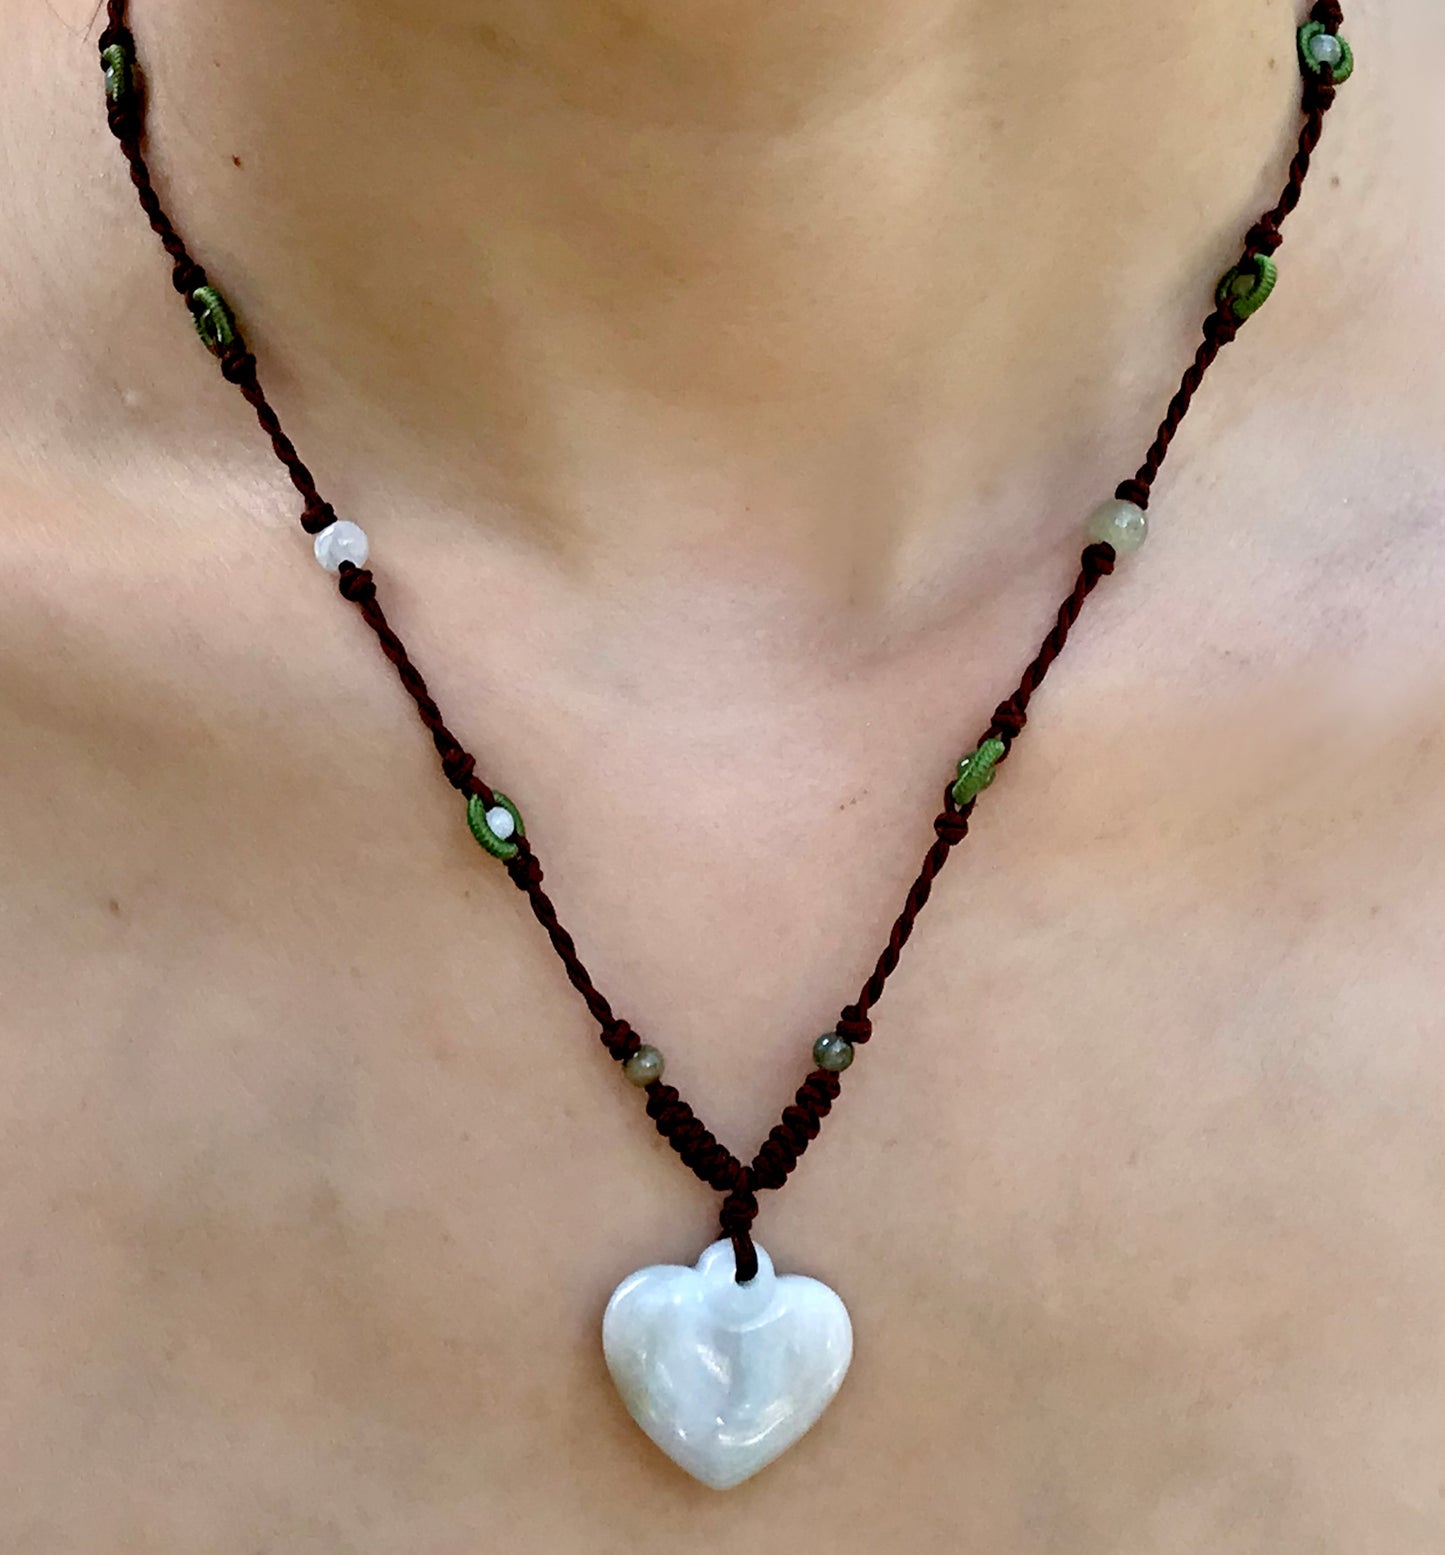 Get the Perfect Fit with Heart Handmade Jade Necklace